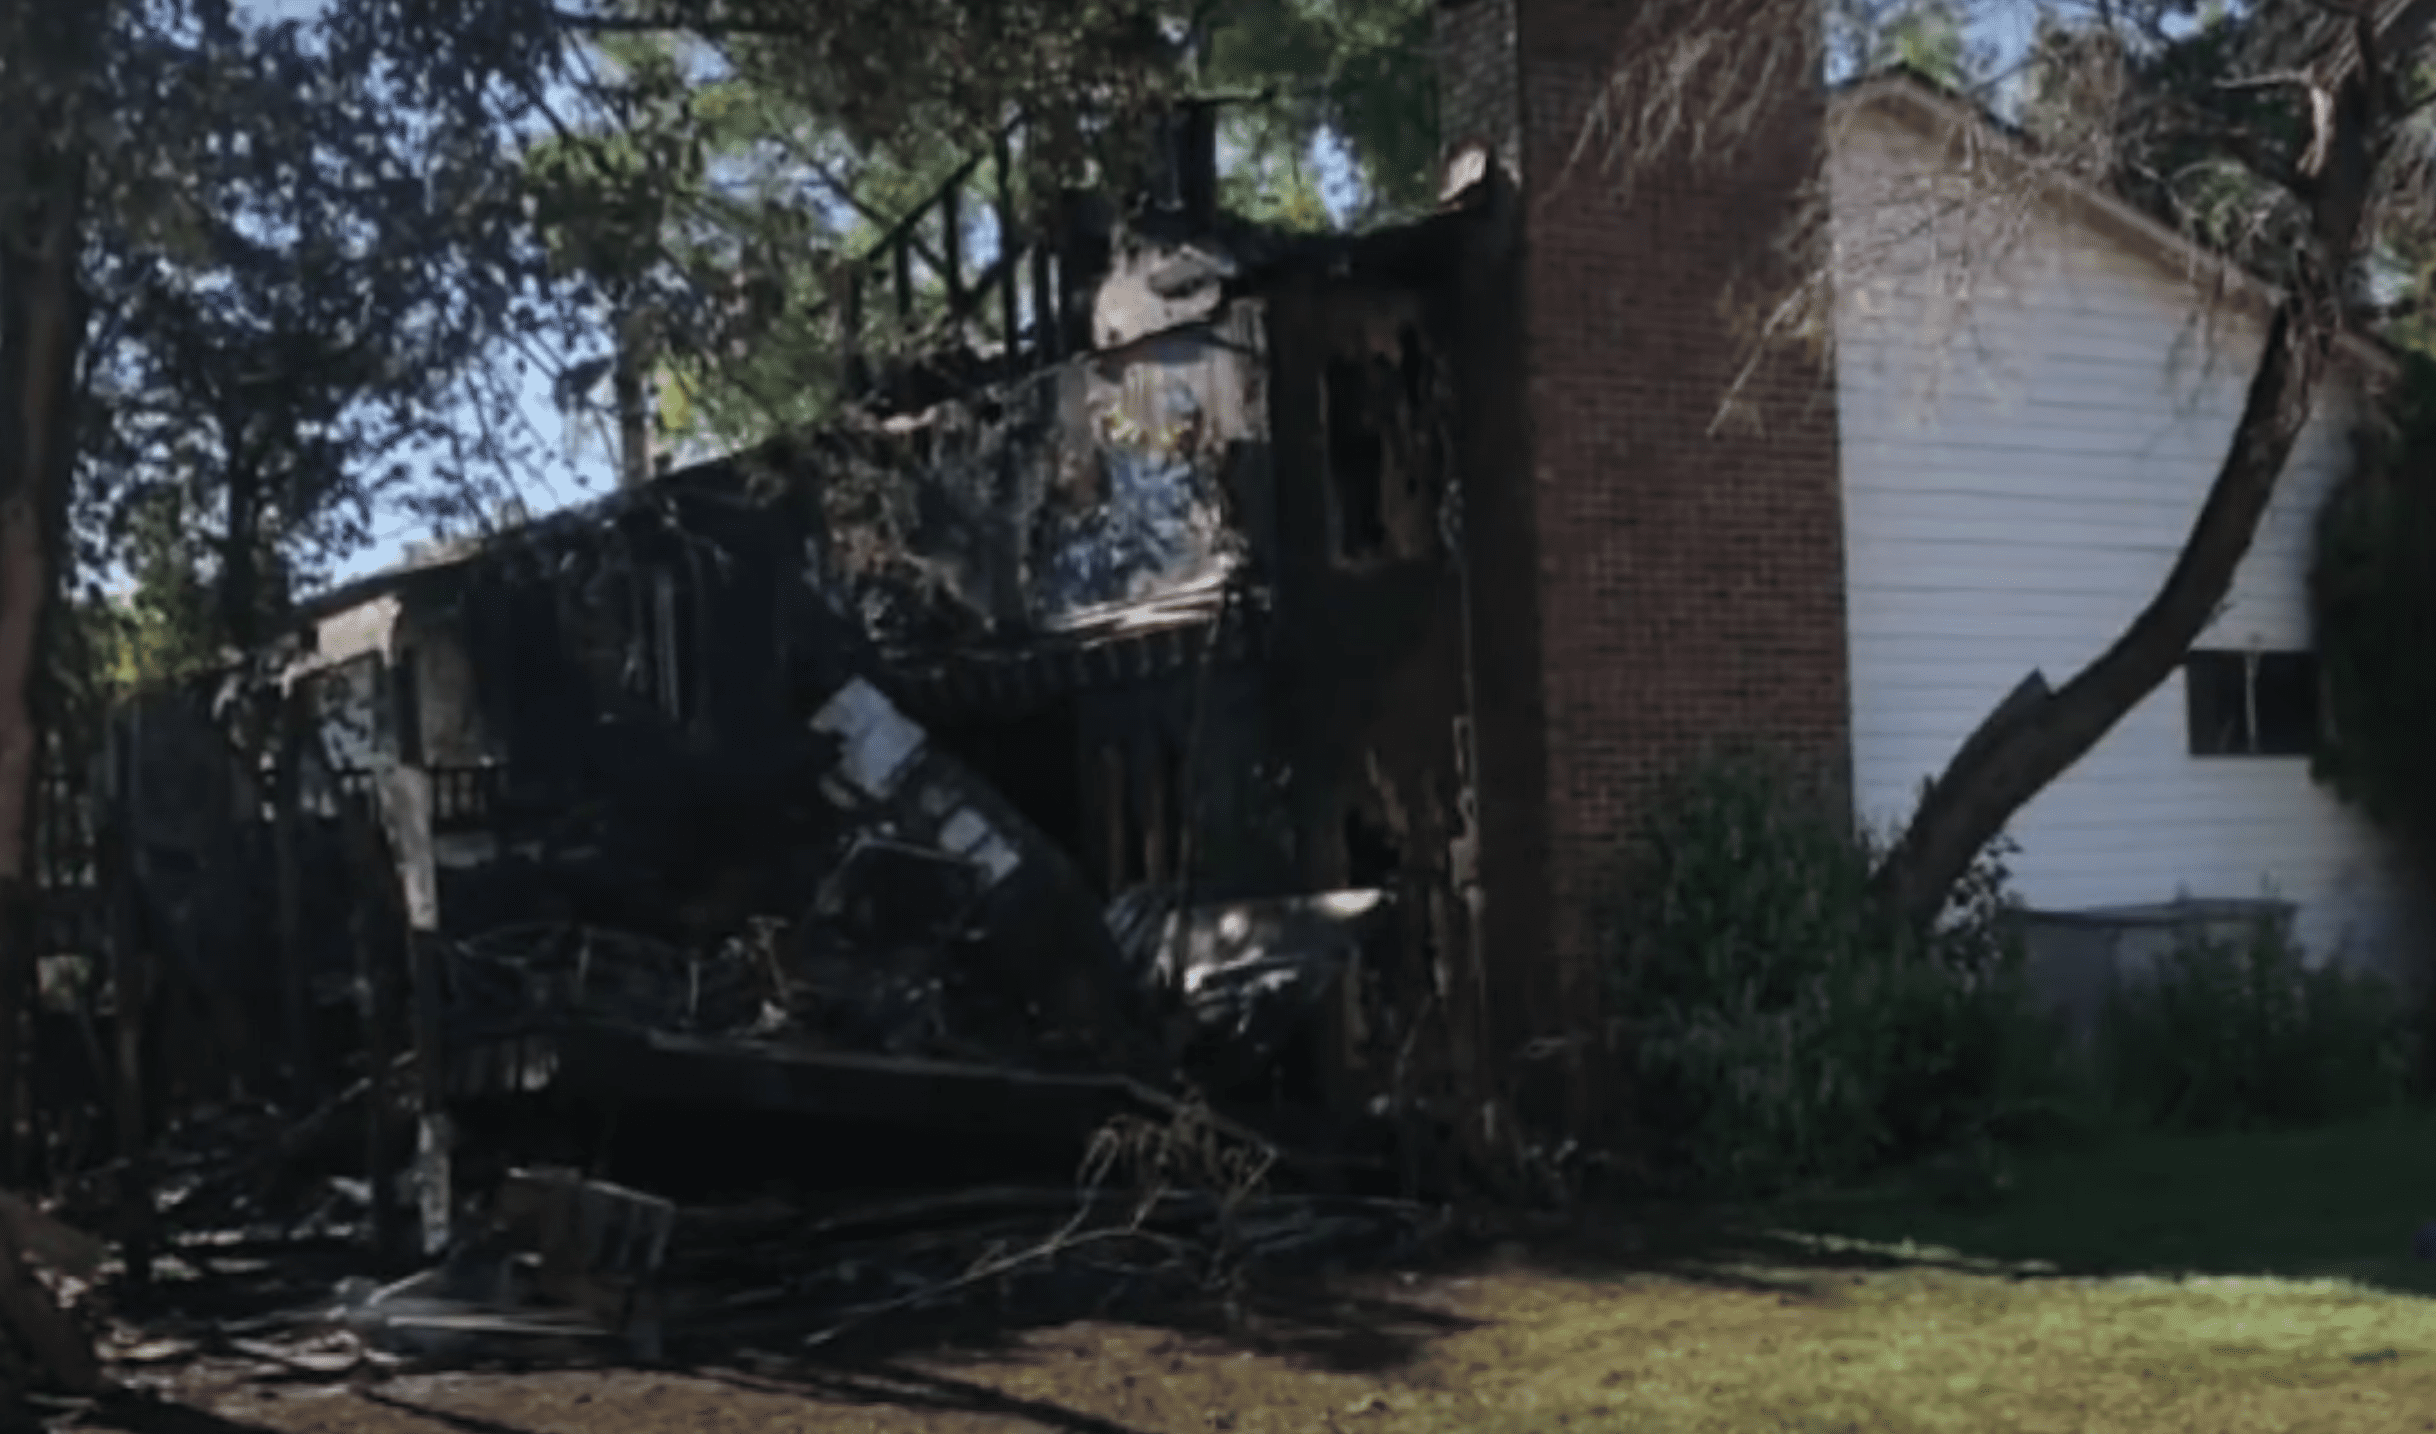 A house that burnt down claiming two lives | Photo: Youtube/Denver7 – The Denver Channel